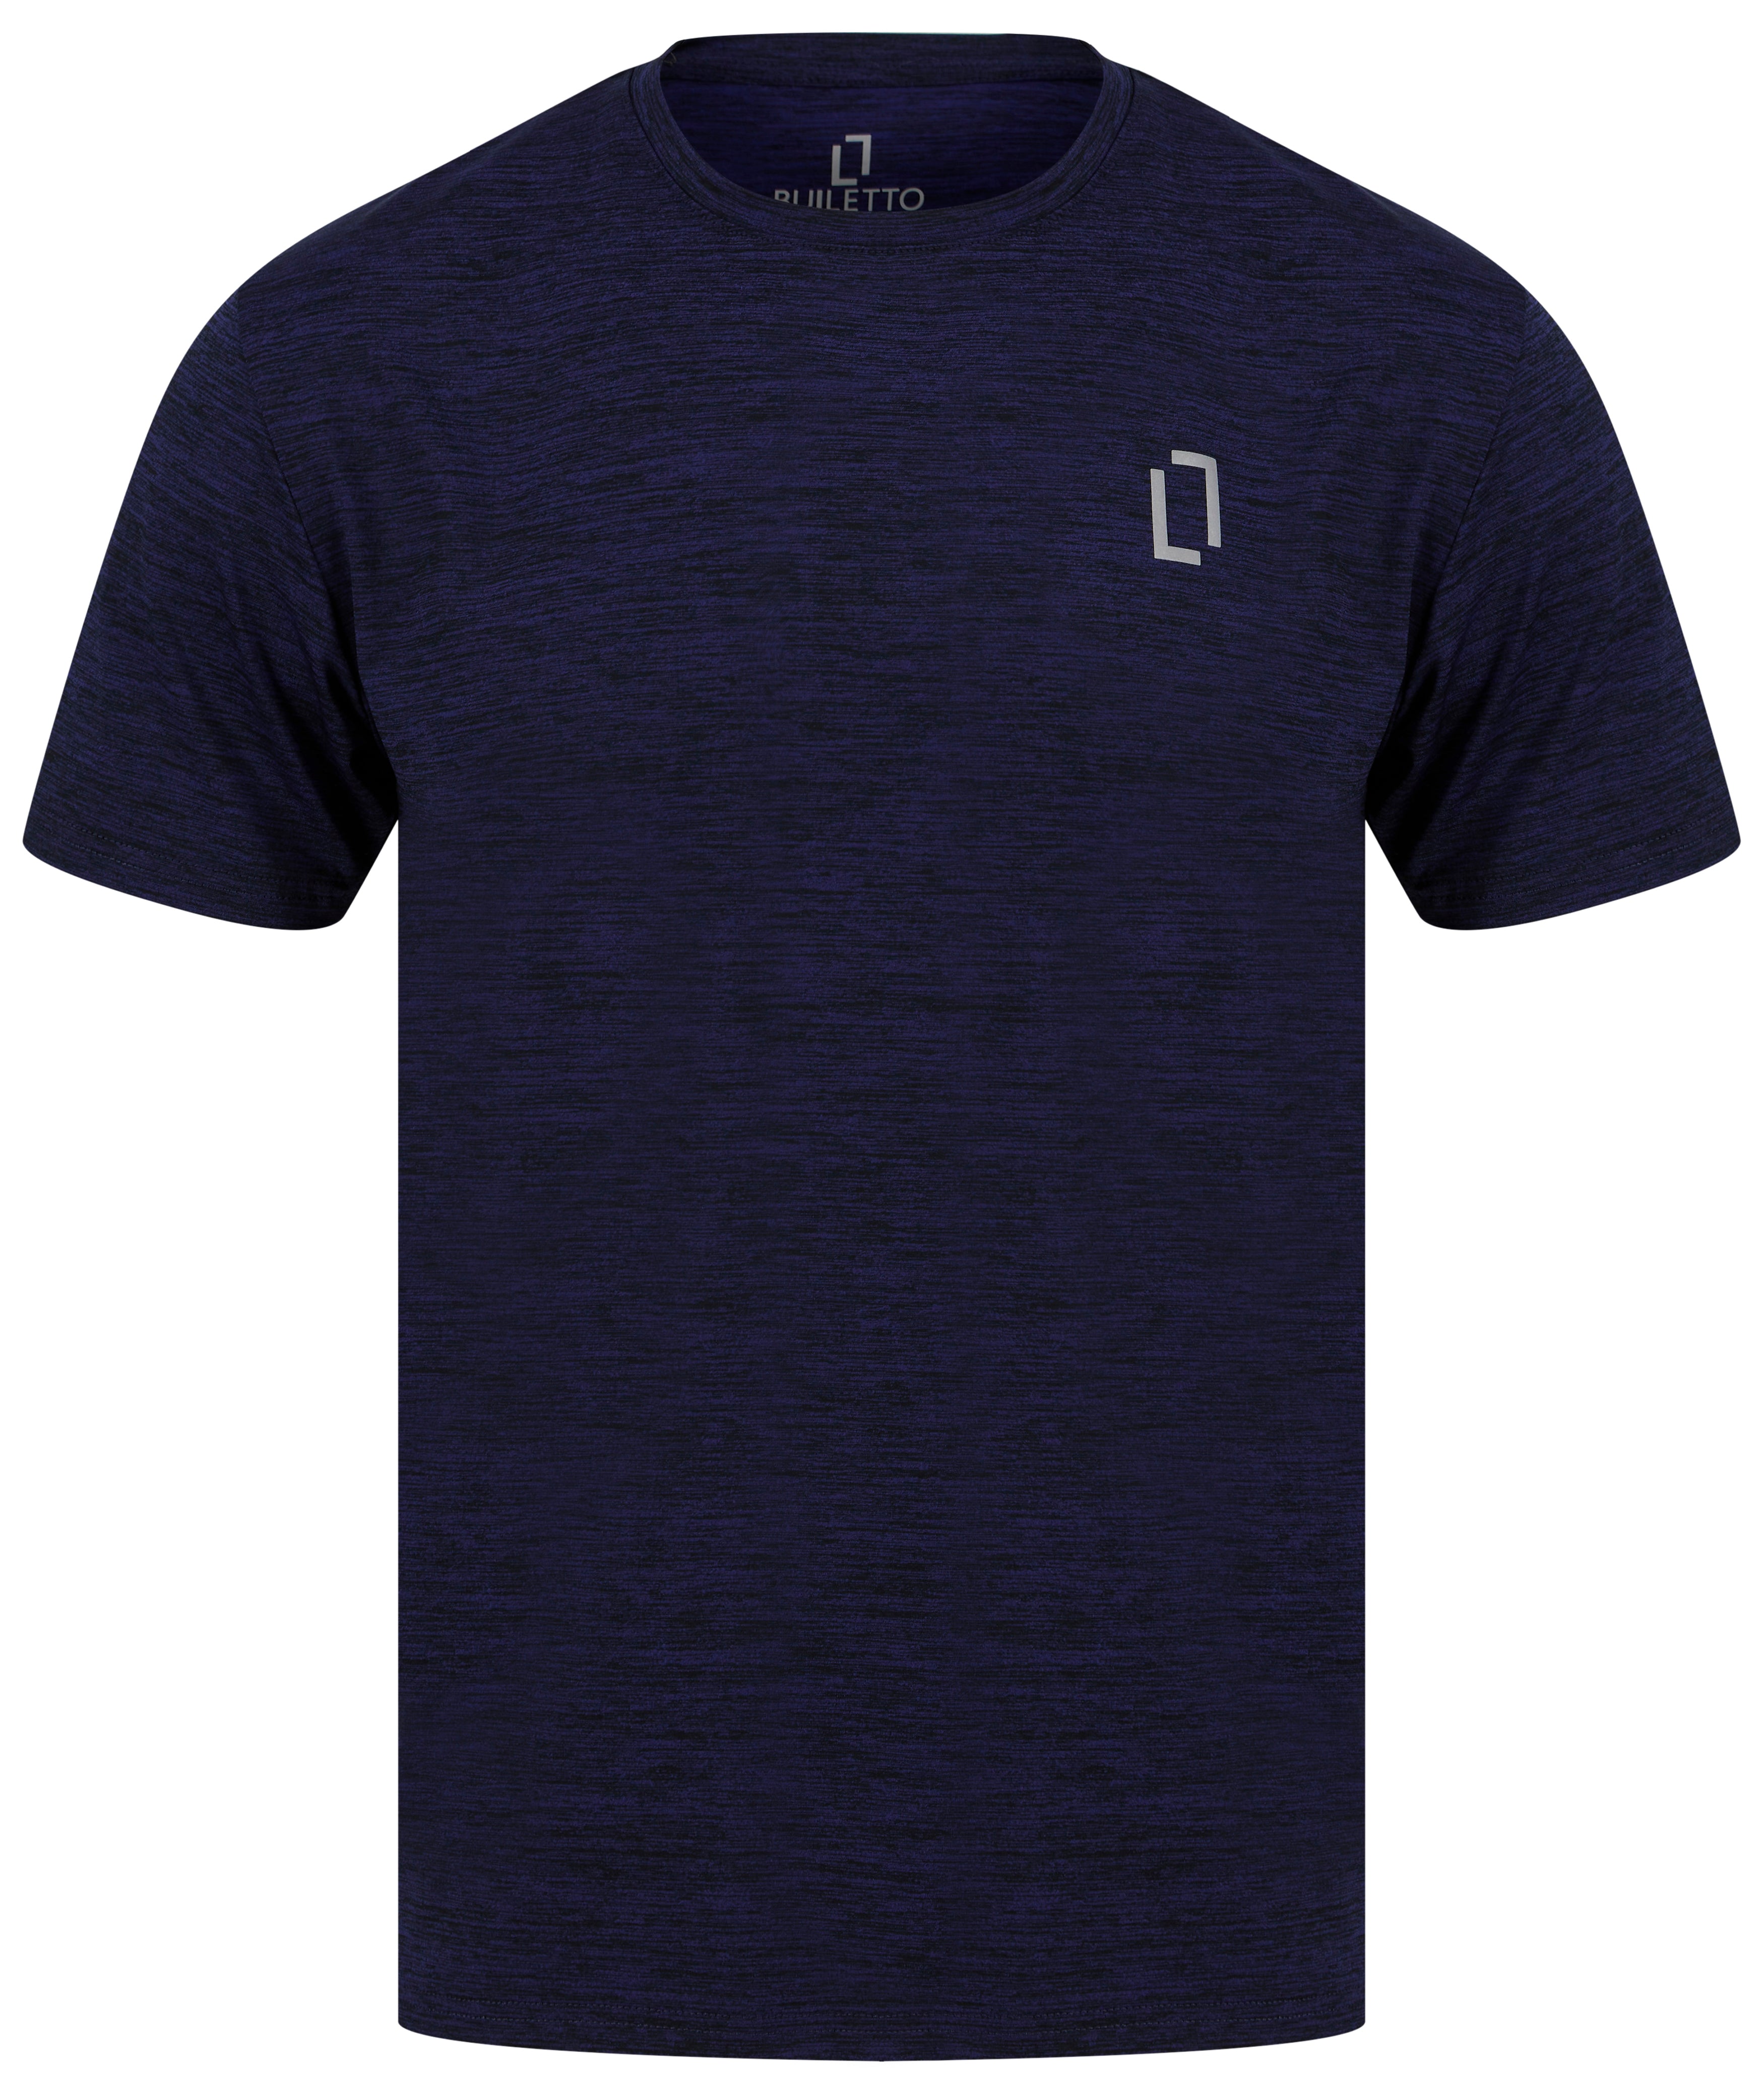 Load image into Gallery viewer, Bulletto Gym T Shirt Navy
